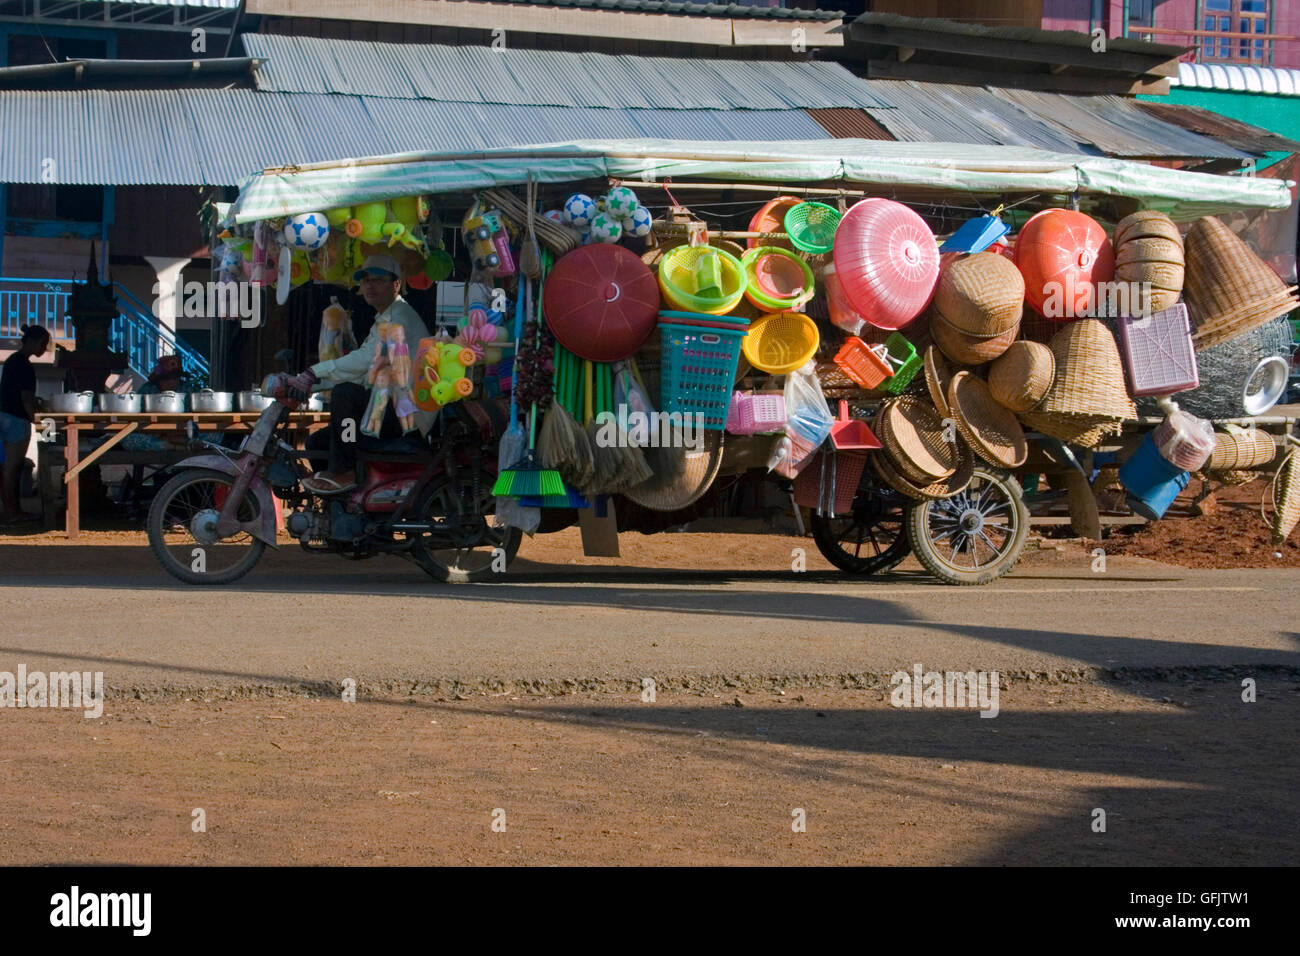 A man is driving a motorcycle towing a trailer loaded with toys & household items on a city street in Chork village, Cambodia. Stock Photo